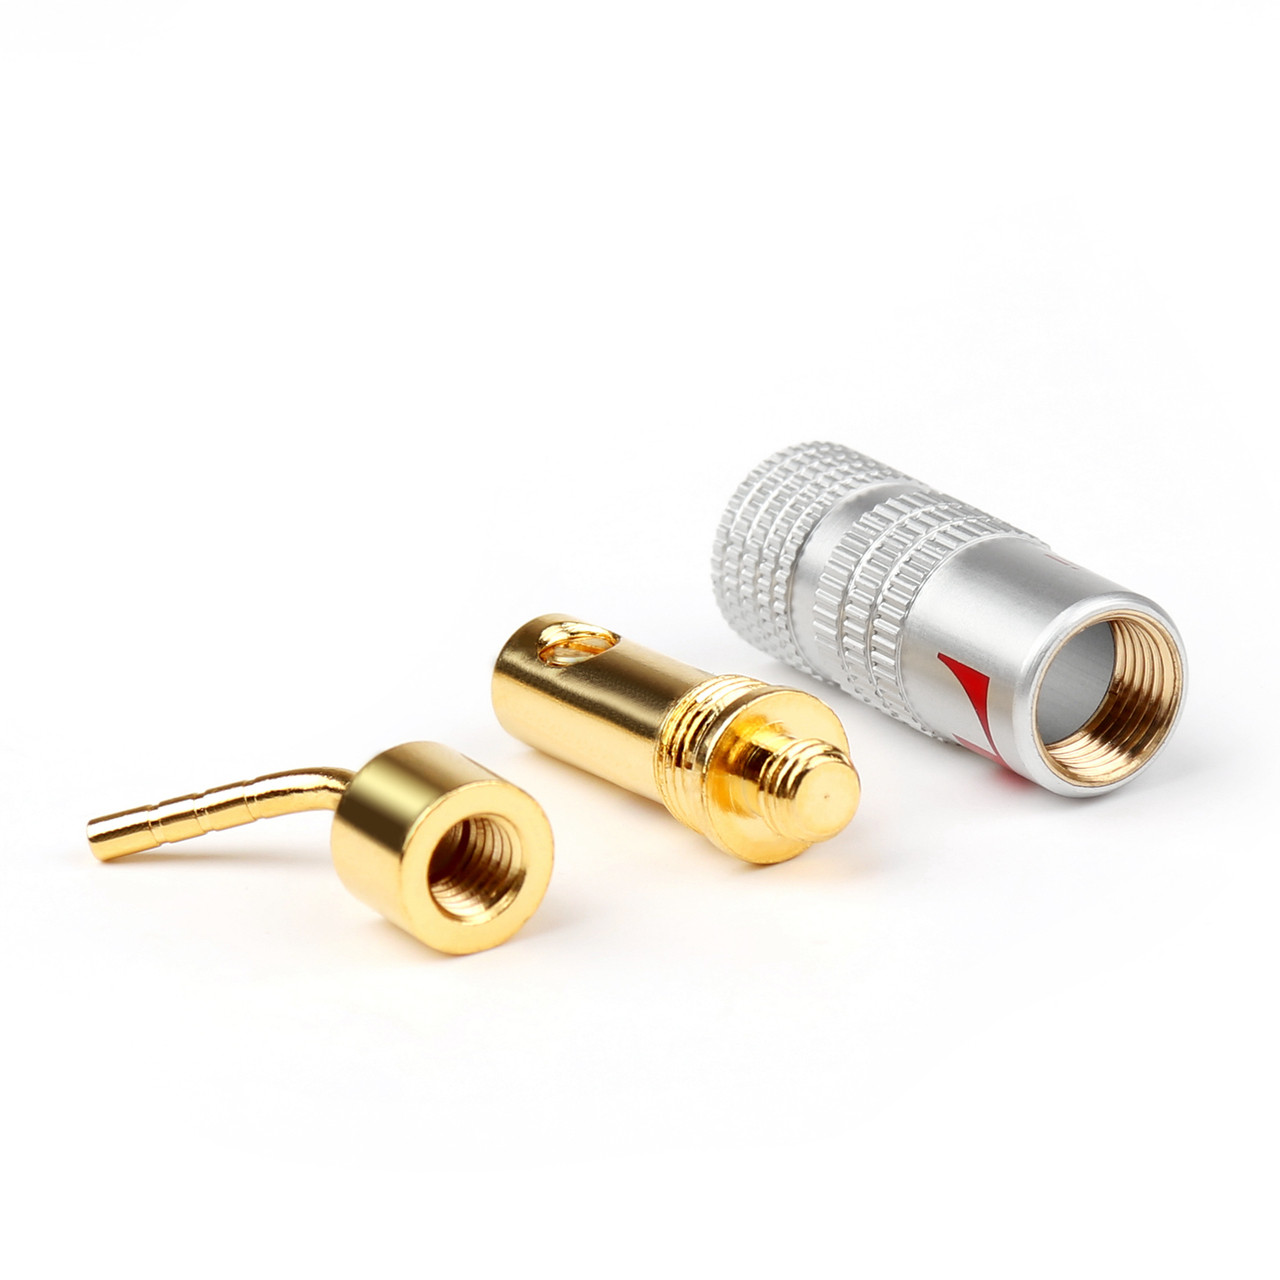 Mad Hornets 1PCS 2mm Banana Pin Plug Gold Plated Aluminum Shell Audio Speaker Adapter Red